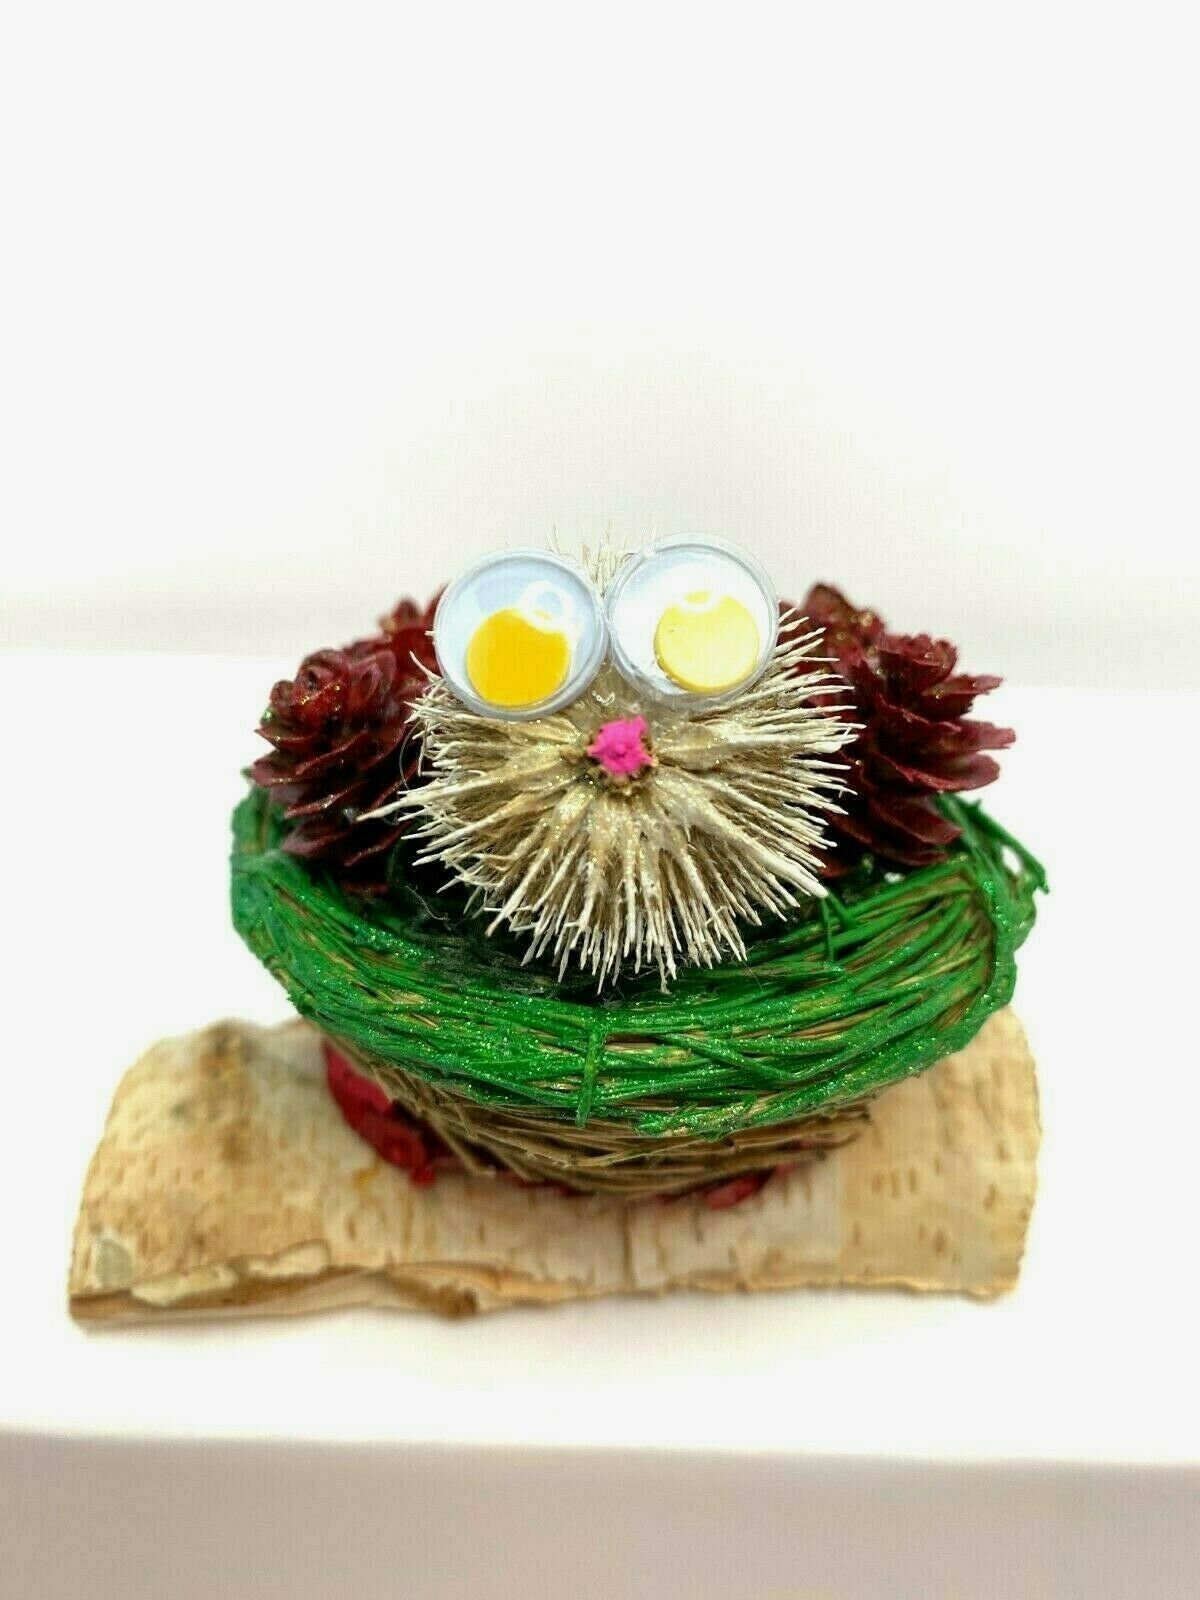 Handmade Christmas Porcupine In Nest With Pinecone Flowers, Burdock, Birch, Natural Art Country Style, Nature, Nest.